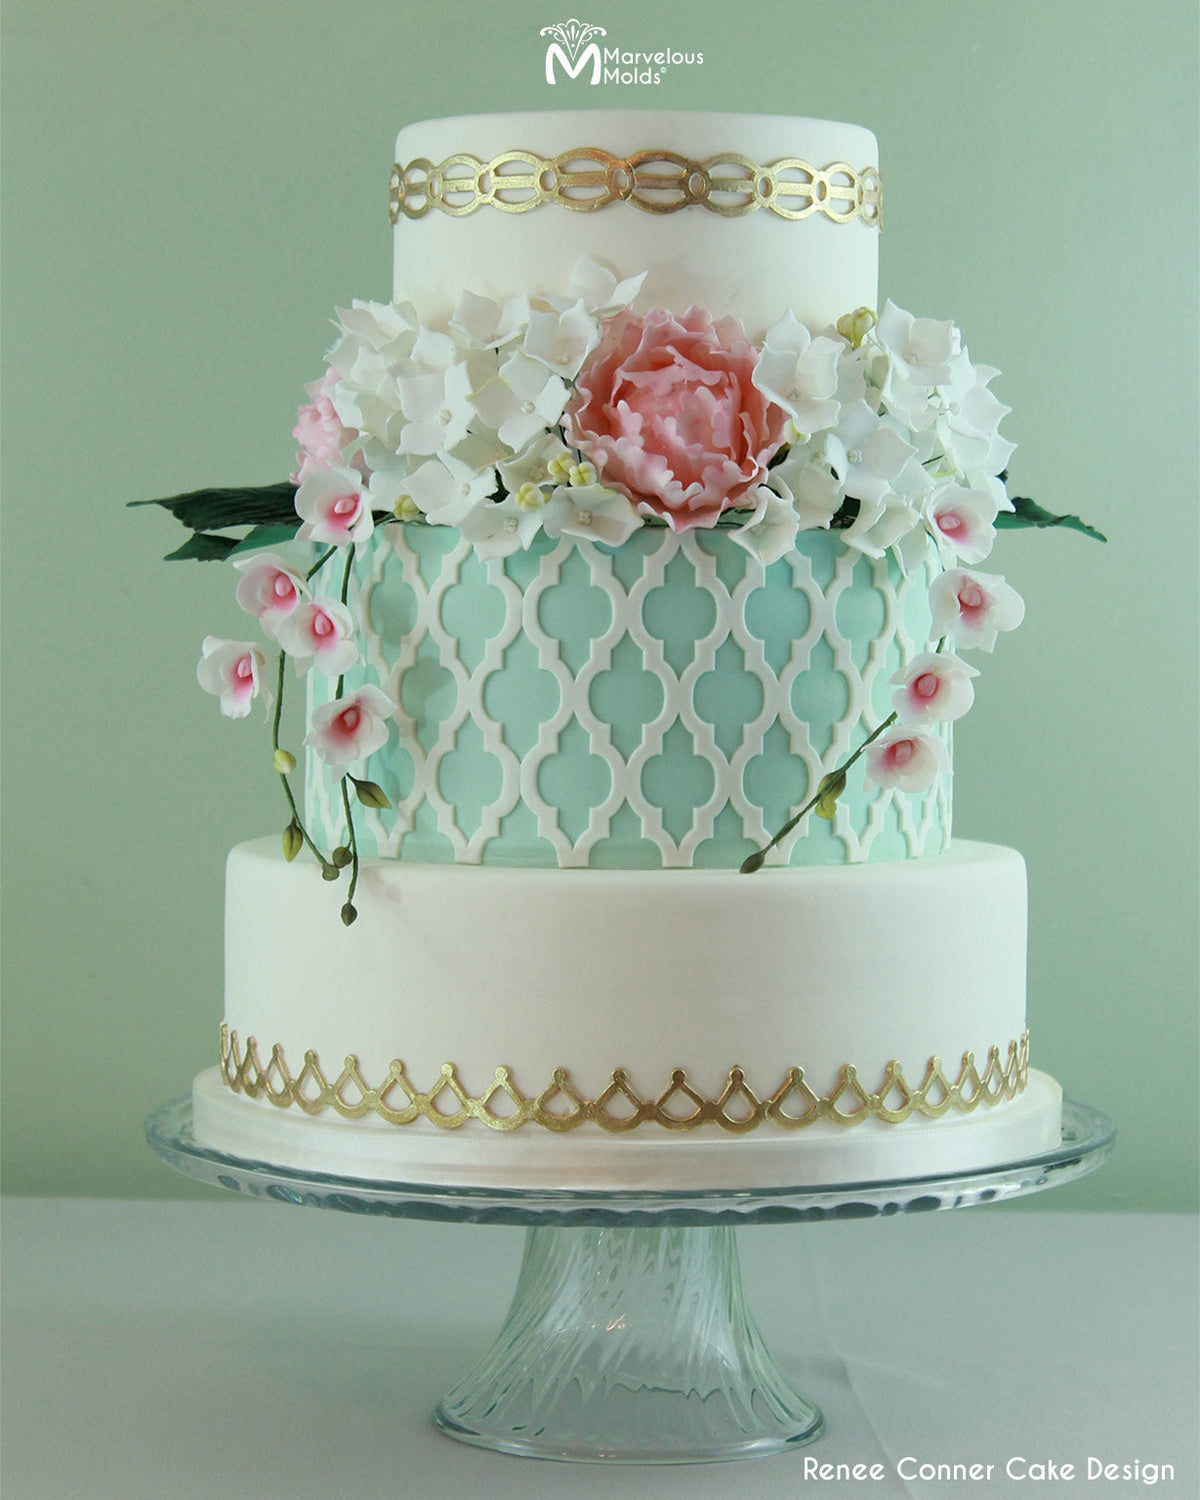 Mint and White Cake with Gold Borders Created Using the Marvelous Molds Regalia Silicone Onlay Cake Stencil